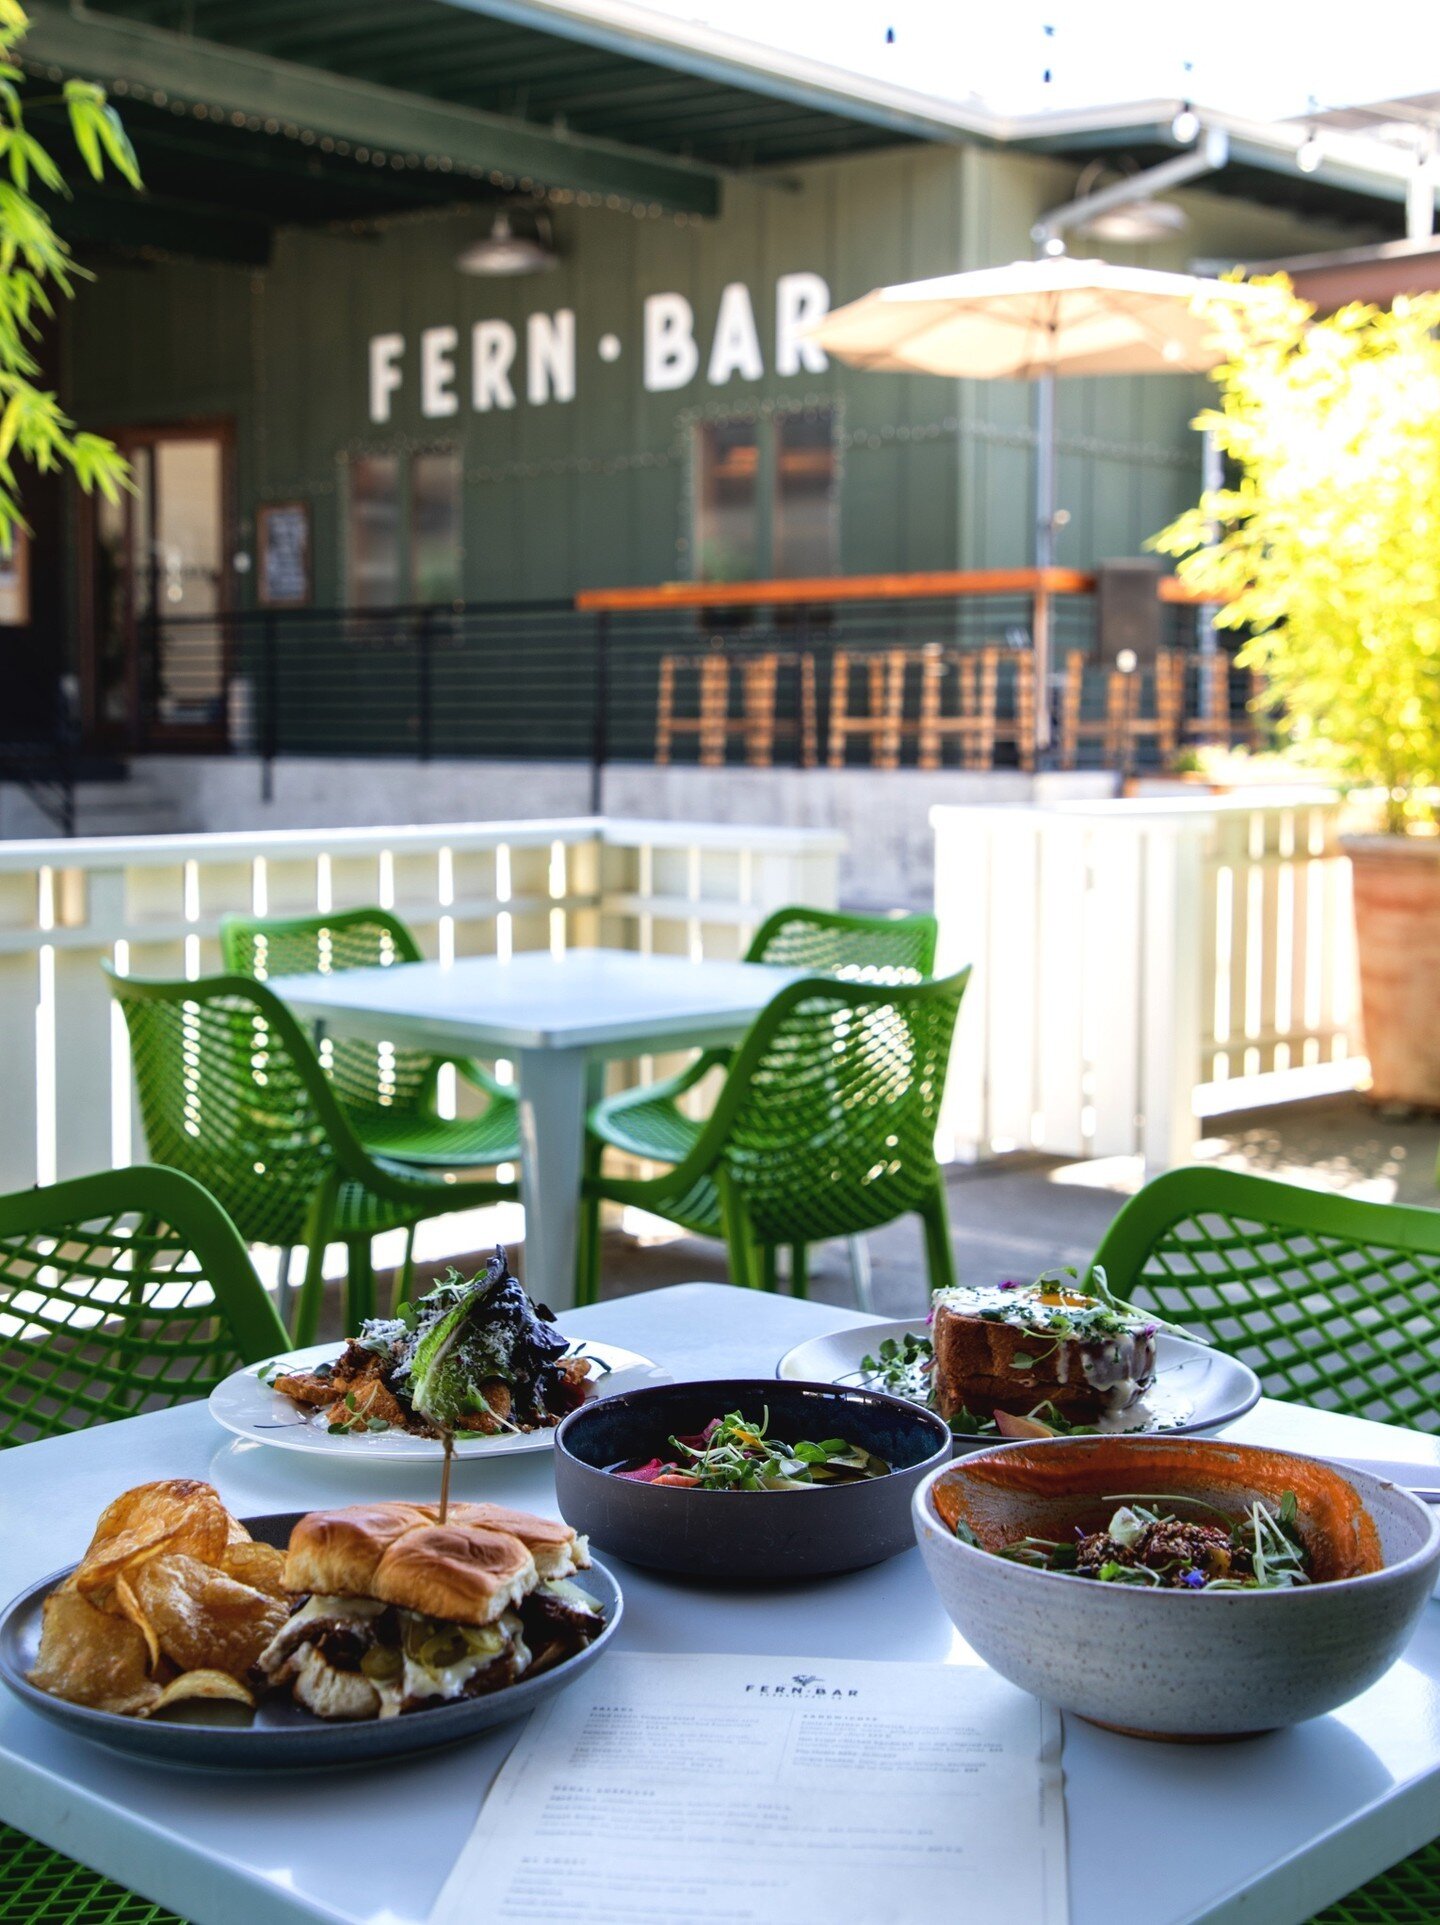 We have some exciting announcements this week! The first of which is that outdoor dining and  lunches are BACK this week starting tomorrow (Wednesday 5/17)!

Join us for lunches Wed-Fri from 11:30-3pm with a lunch-only menu and our outdoor, dog frien